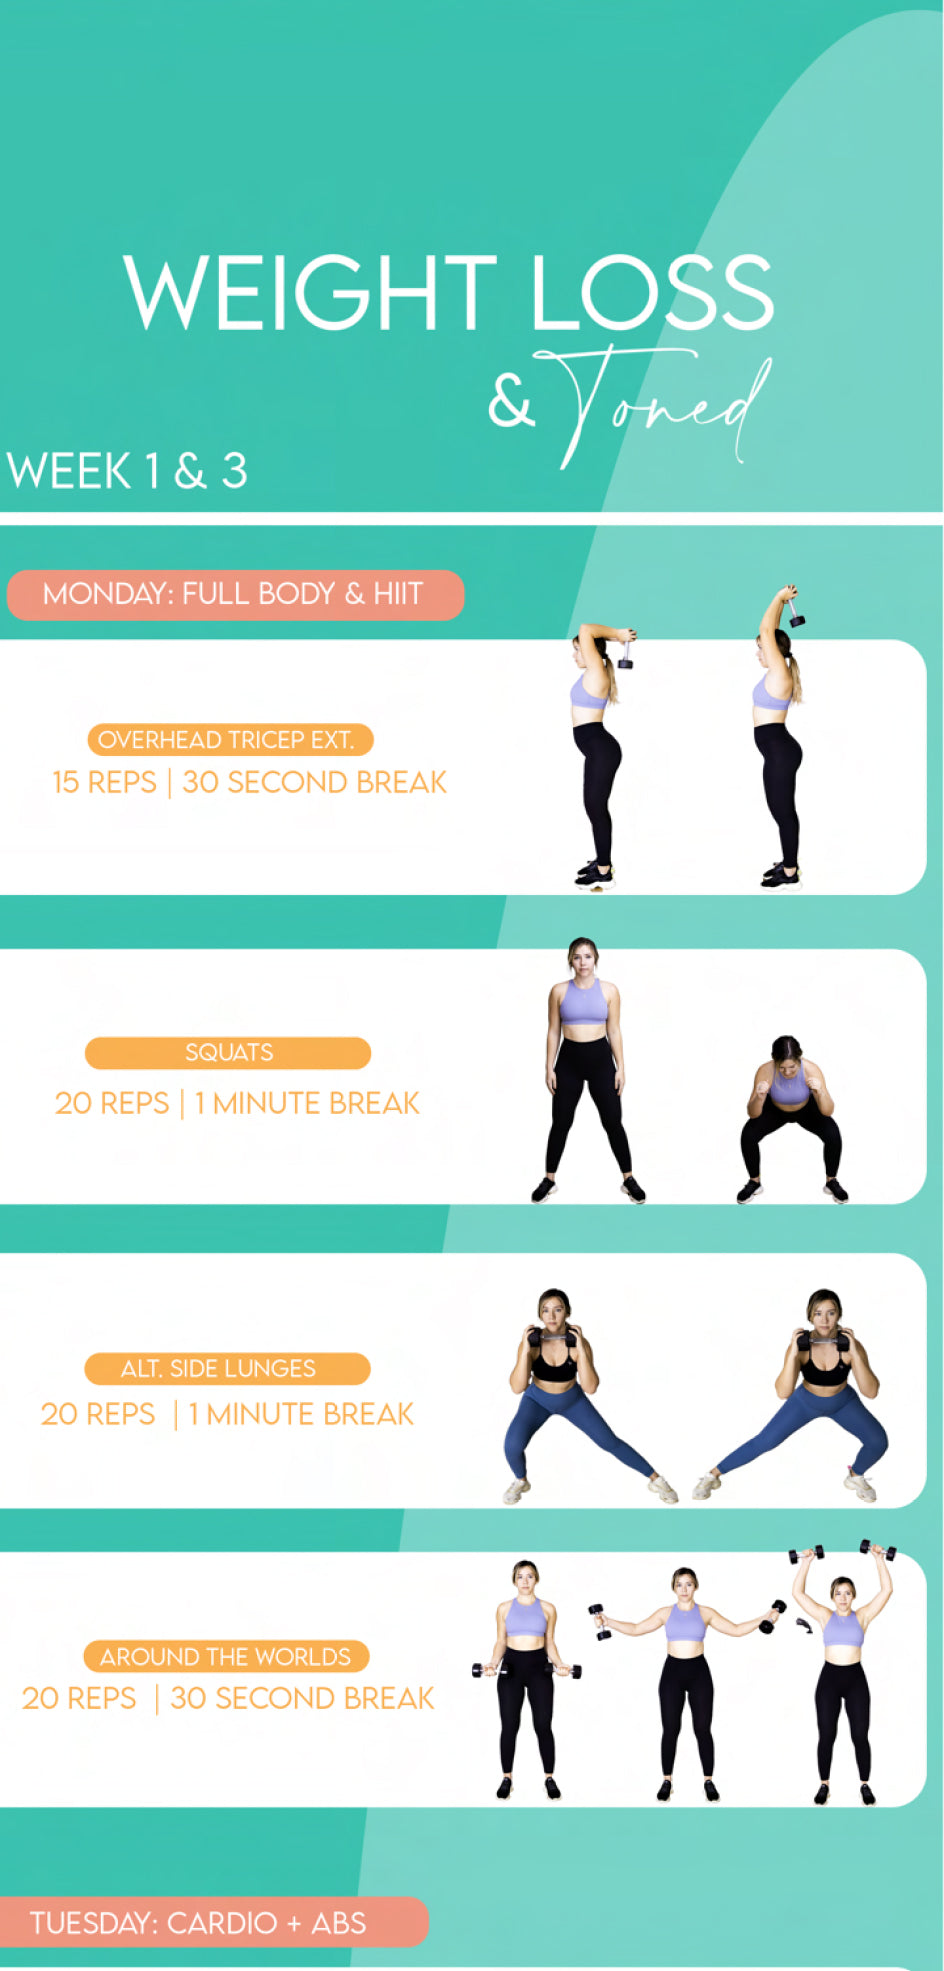 Weight Loss and Toned | The 4-Week Workout Guide by Briana K